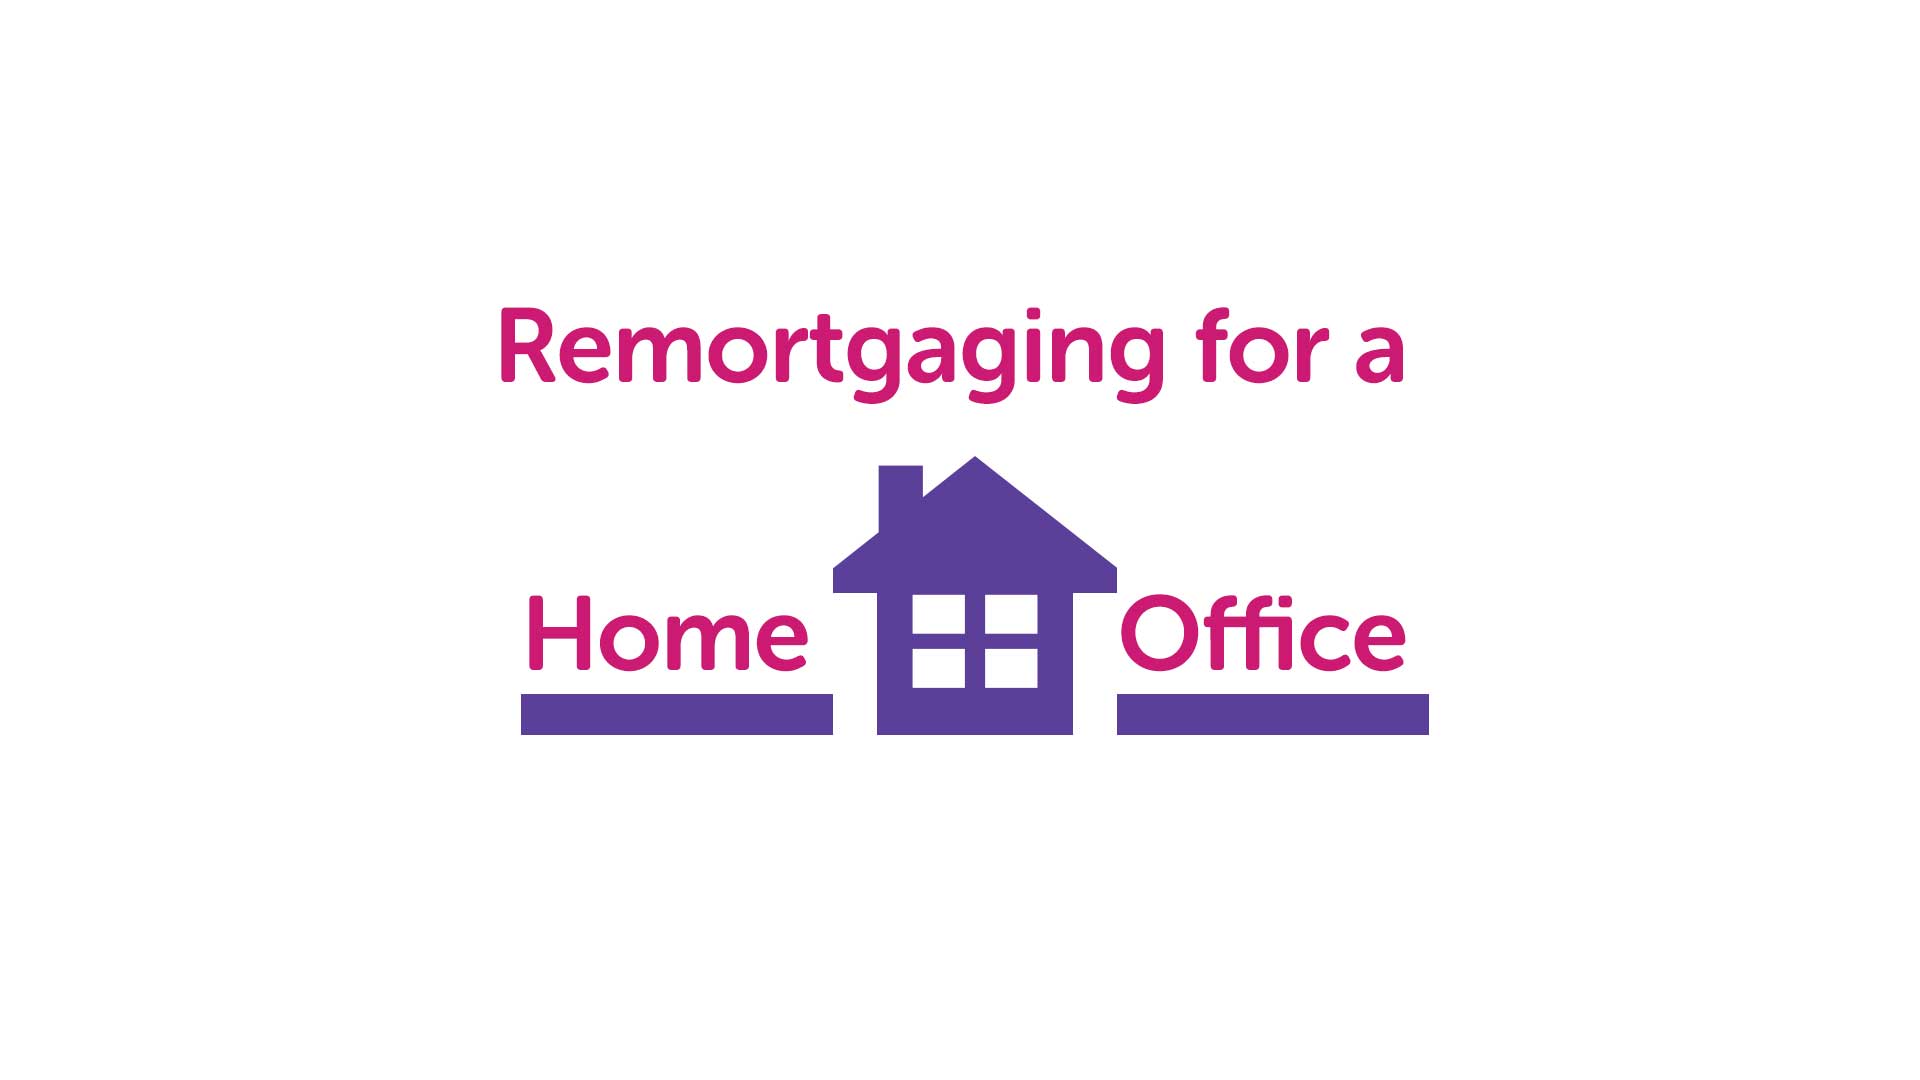 Can I Remortgage in Essex for a Home Office?